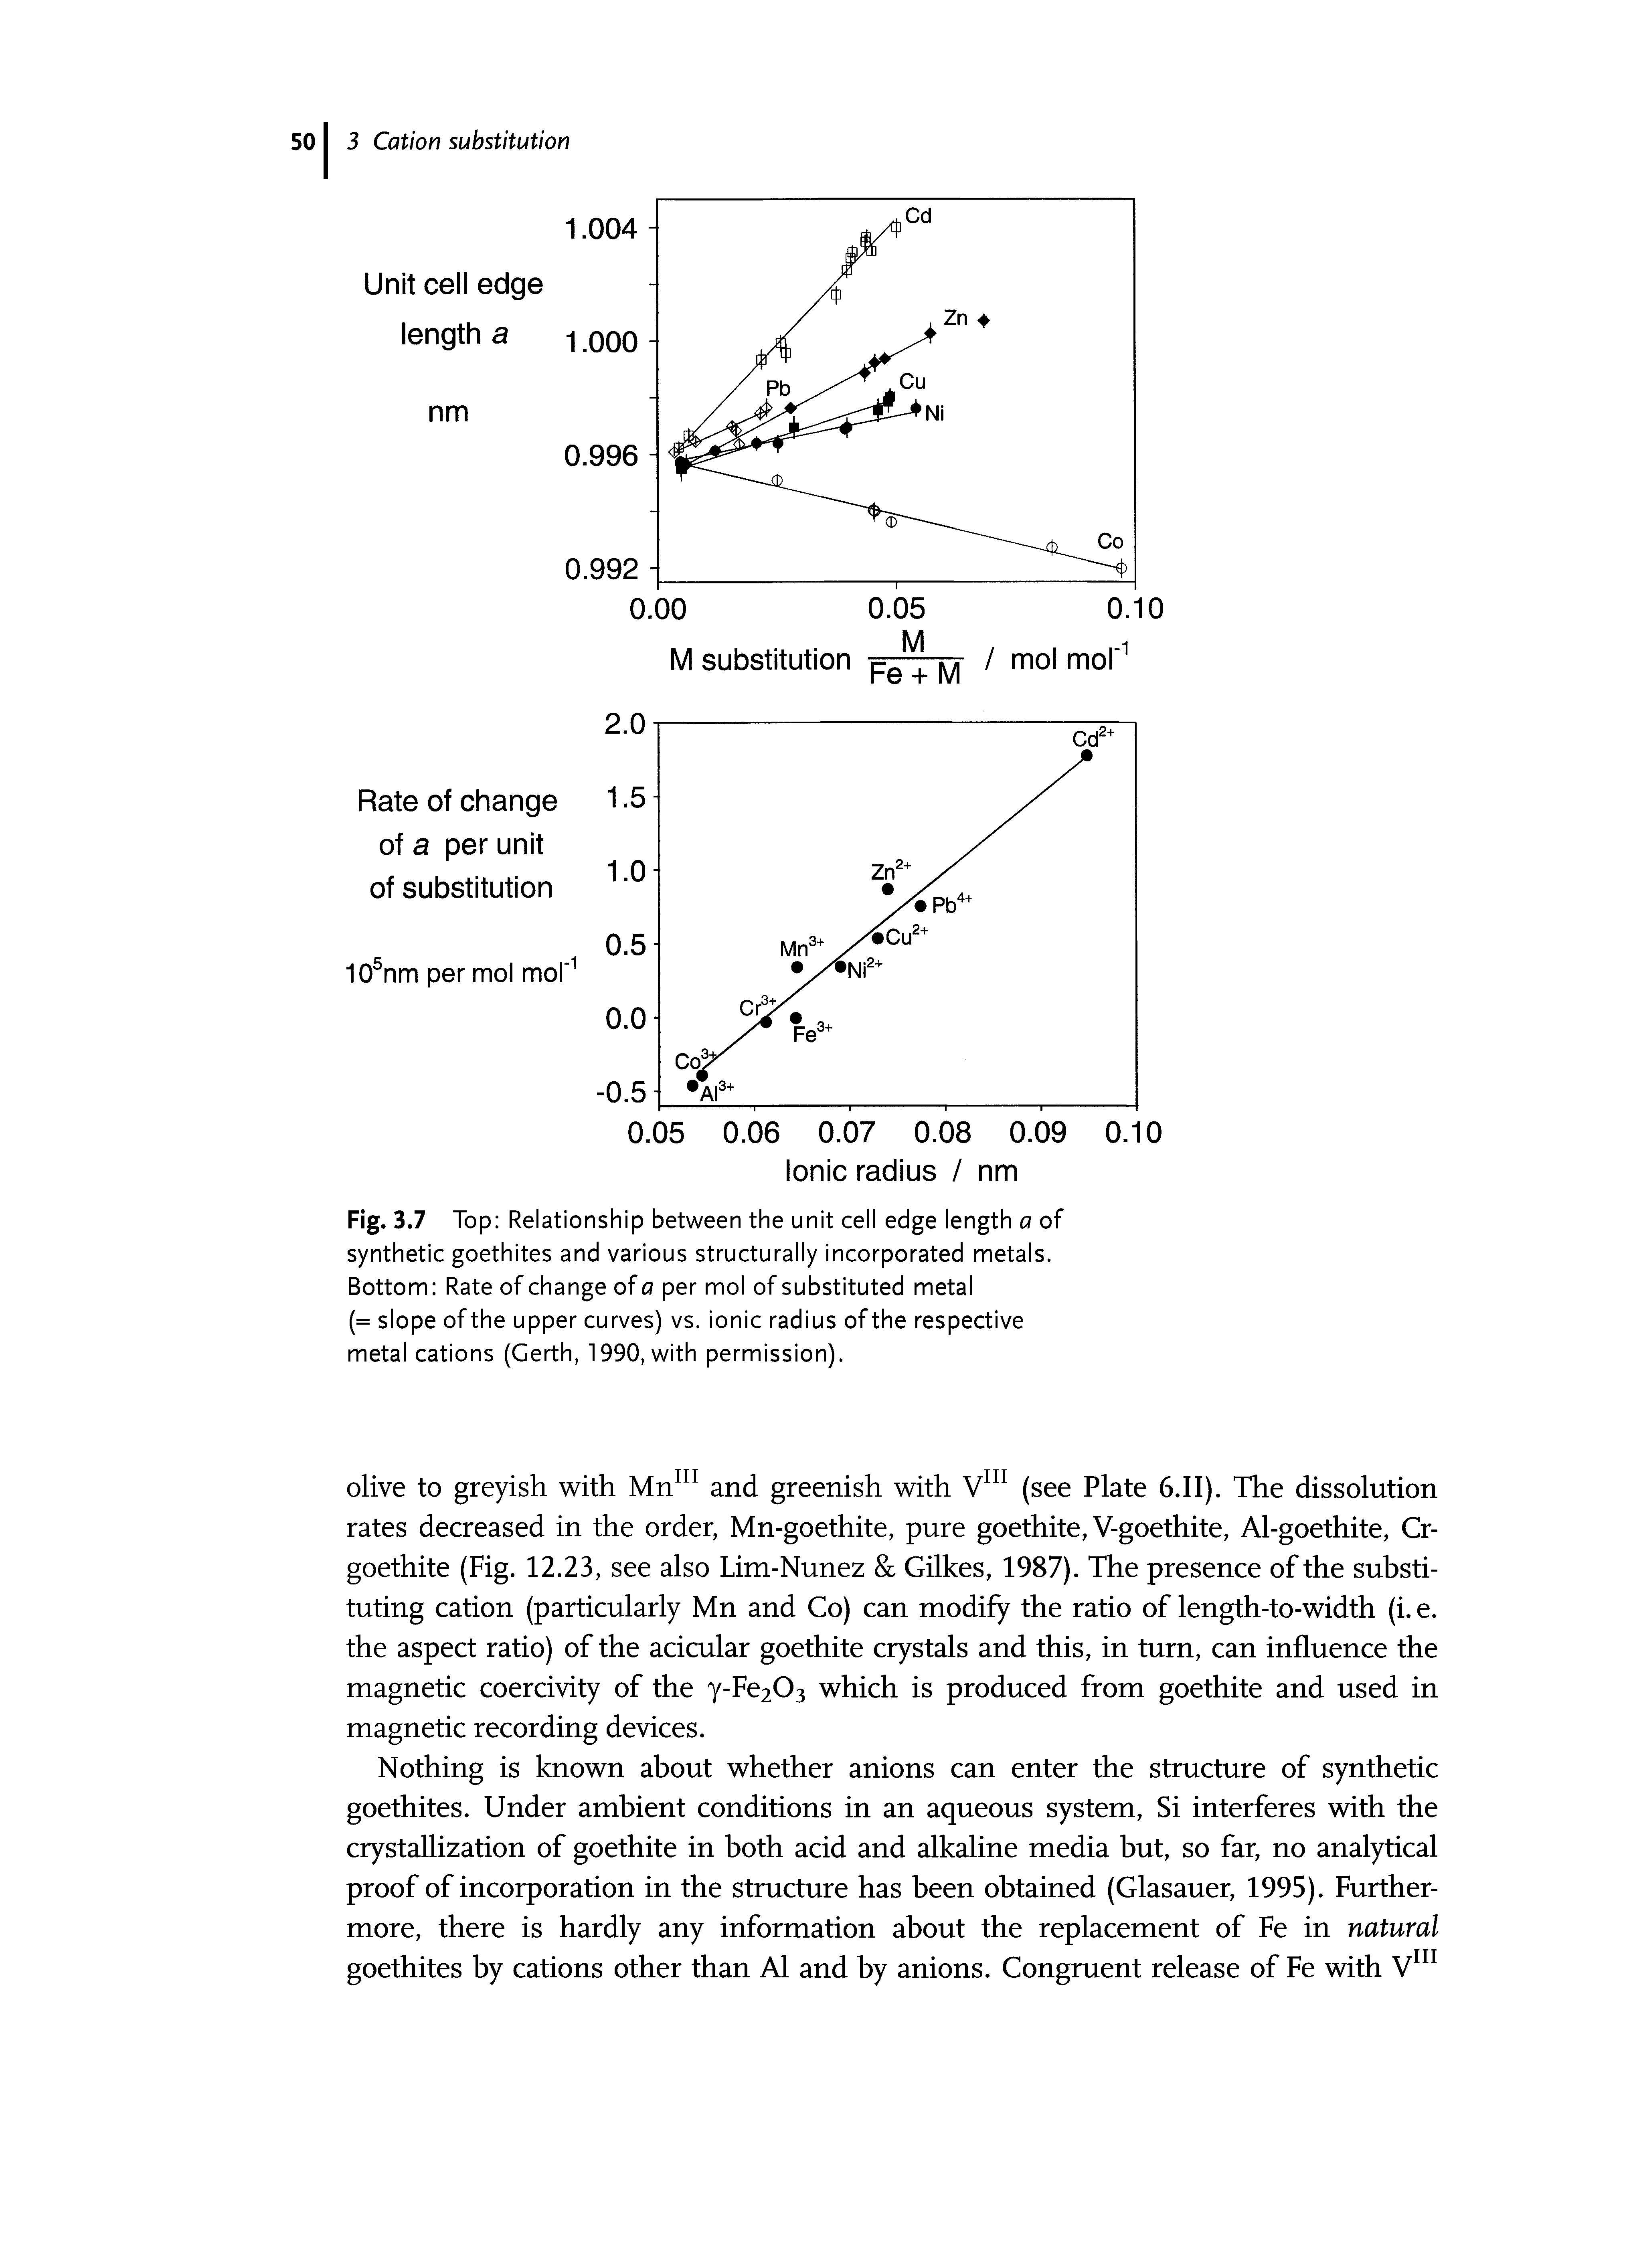 Fig. 3.7 Top Relationship between the unit cell edge length a of synthetic goethites and various structurally incorporated metals. Bottom Rate of change of a per mol of substituted metal (= slope of the upper curves) vs. ionic radius of the respective metal cations (Gerth, 1990, with permission).